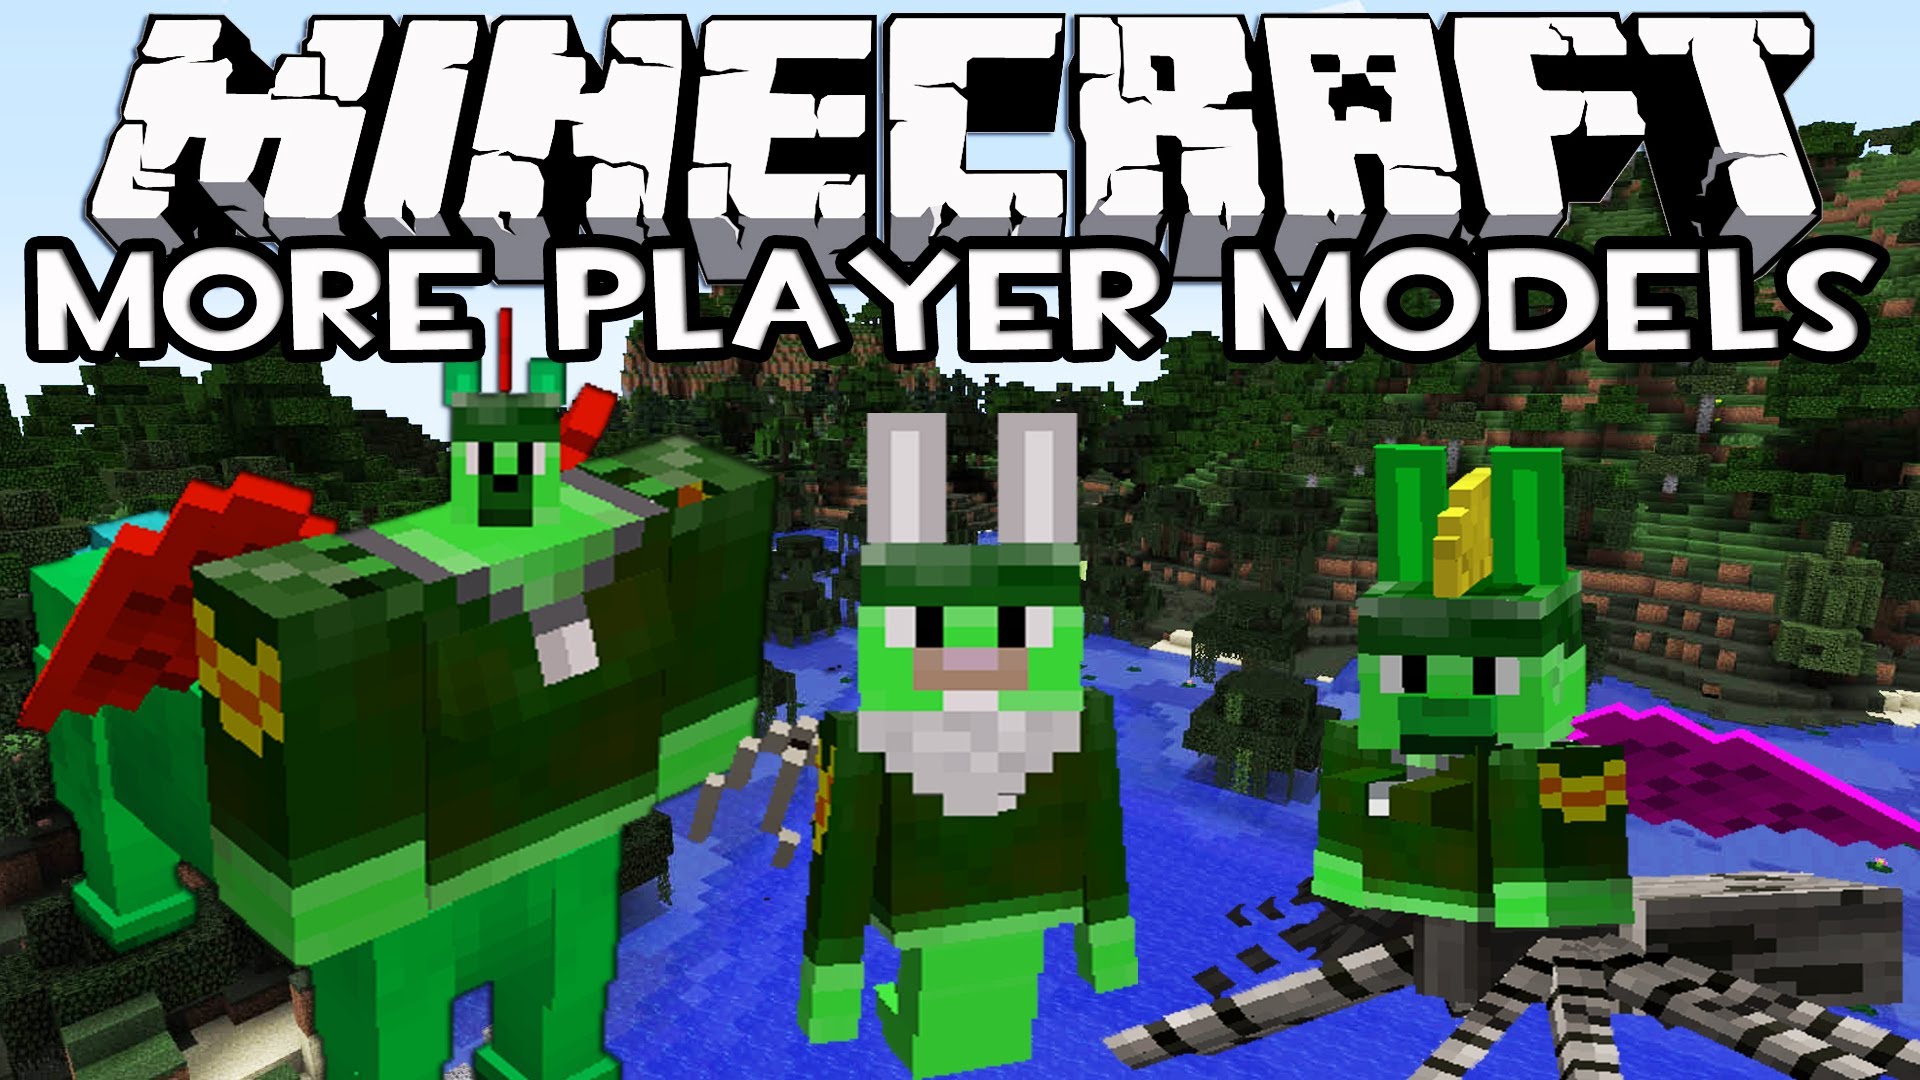 More Player Models, Minecraft 1.7.10